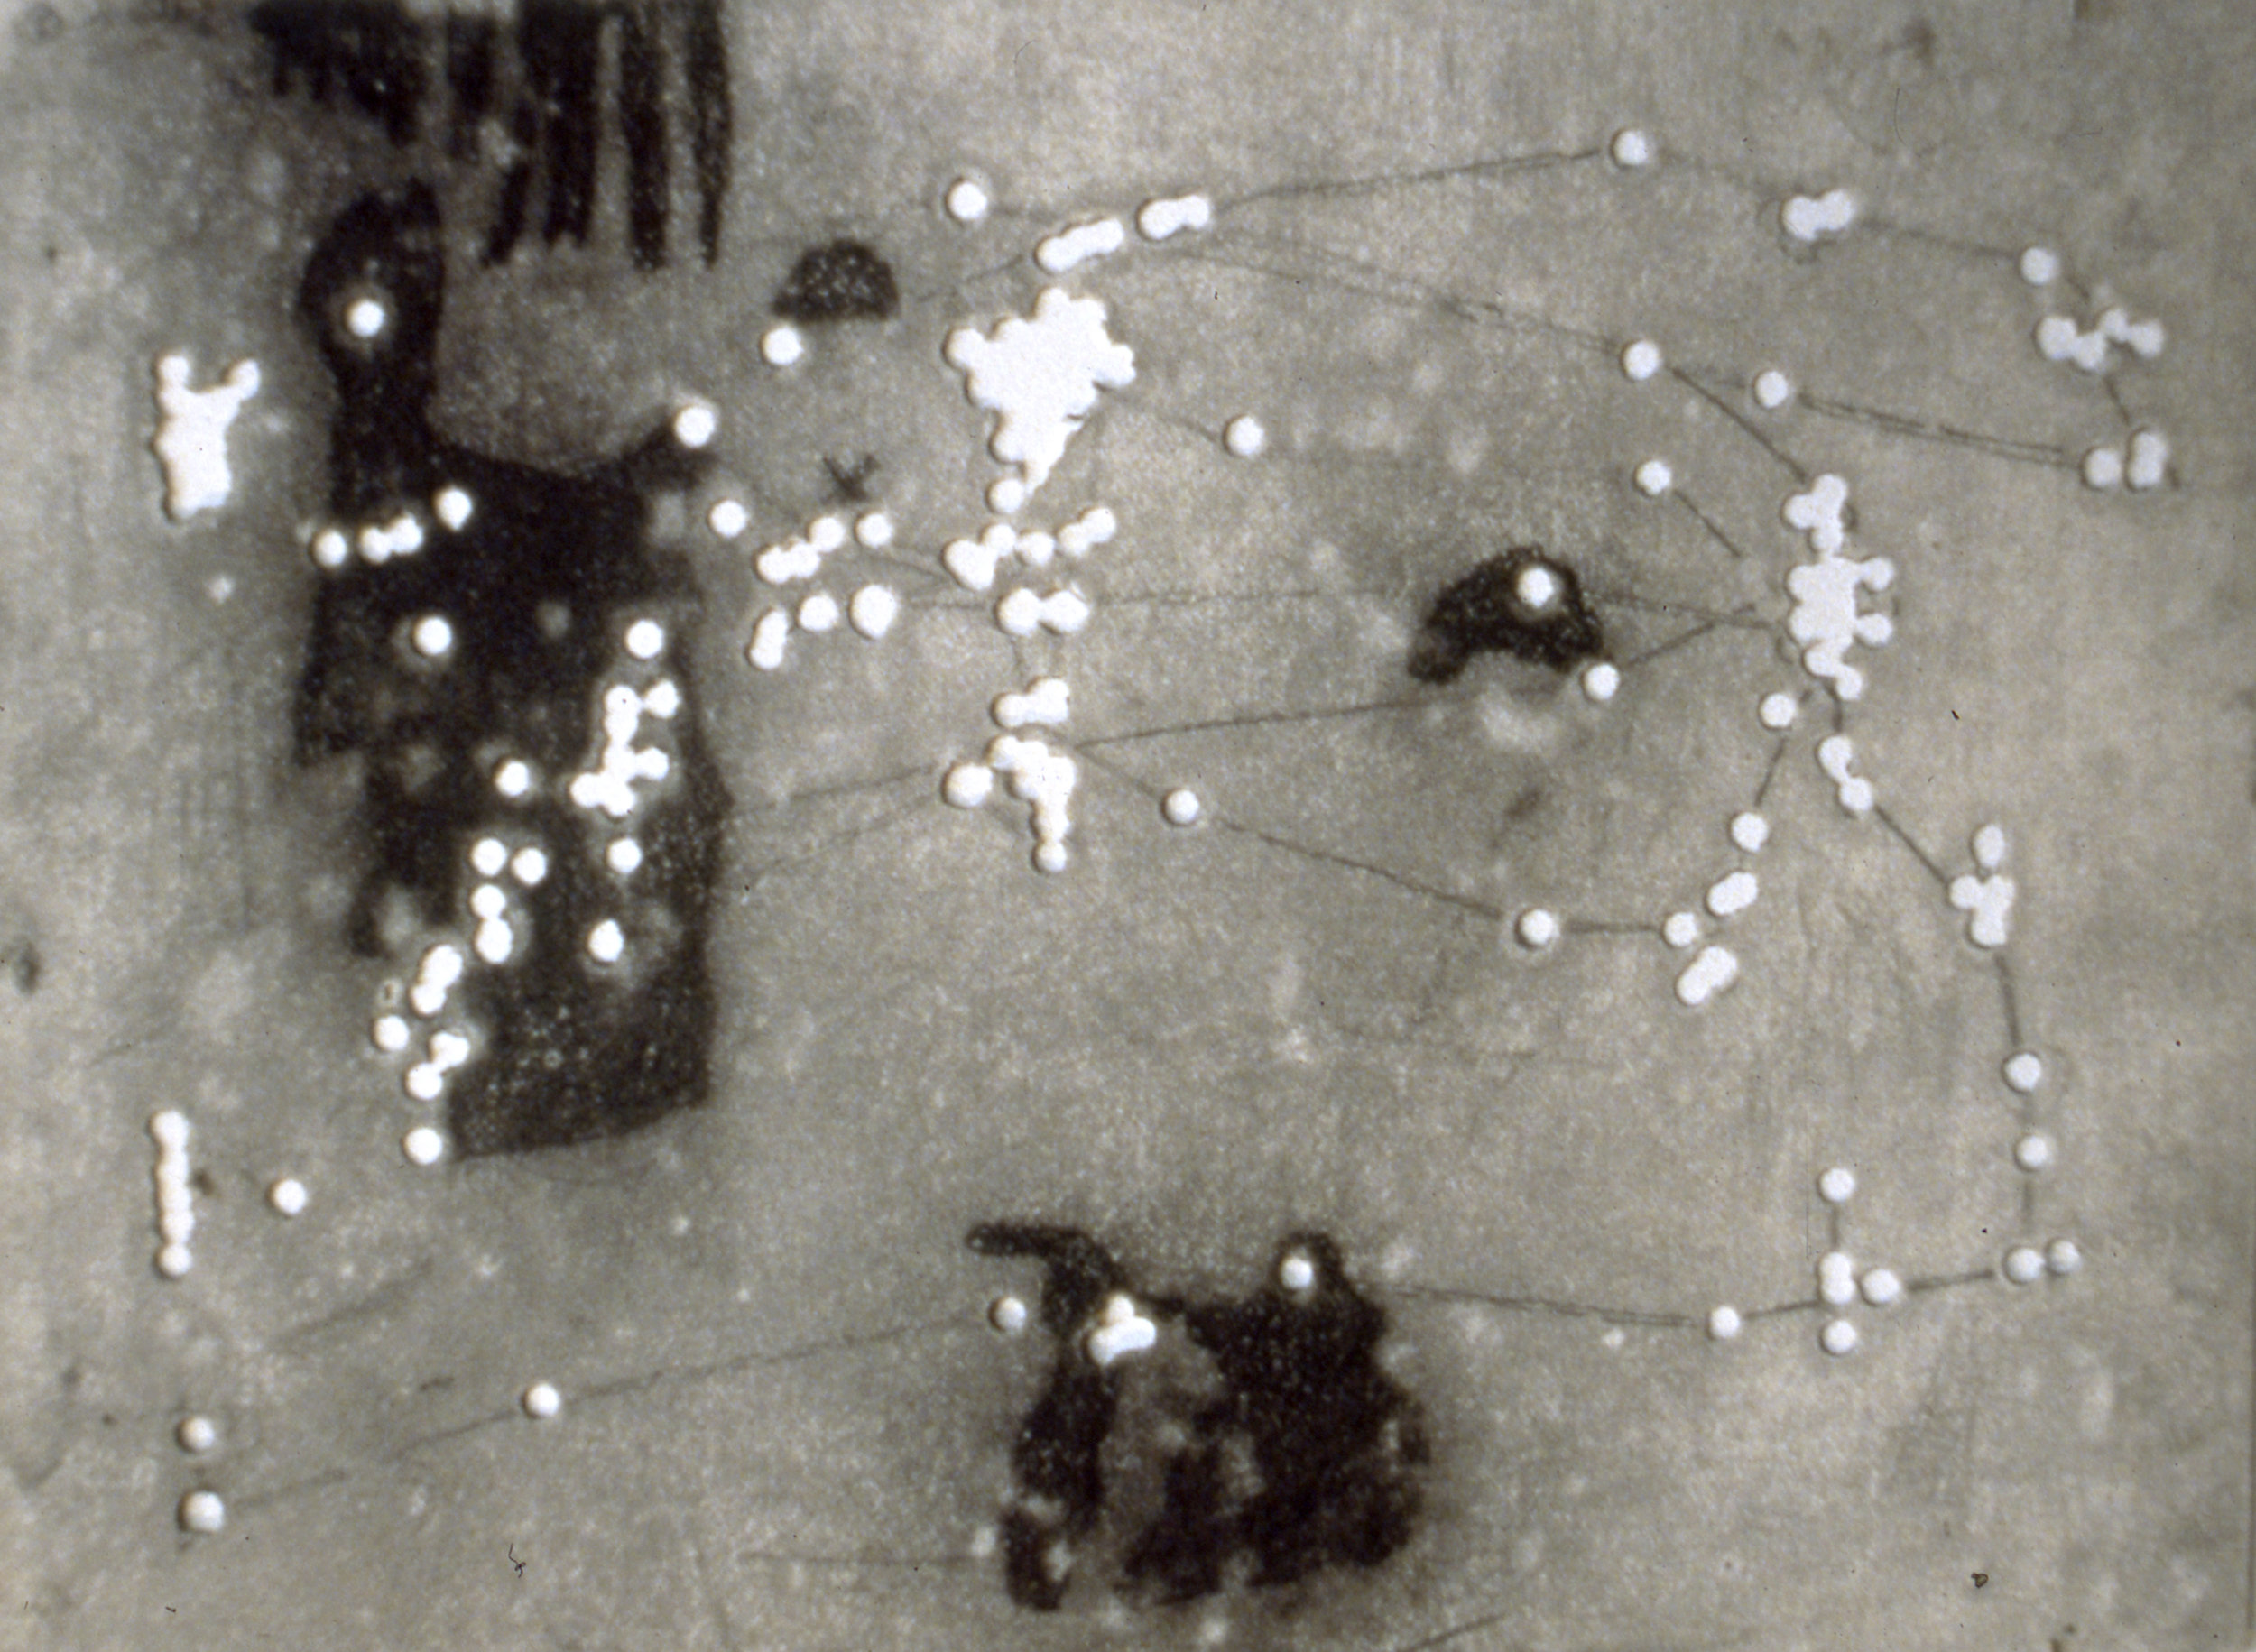 REM 1, 1996-97, Graphite on paper with holes, 15 x 20 inches